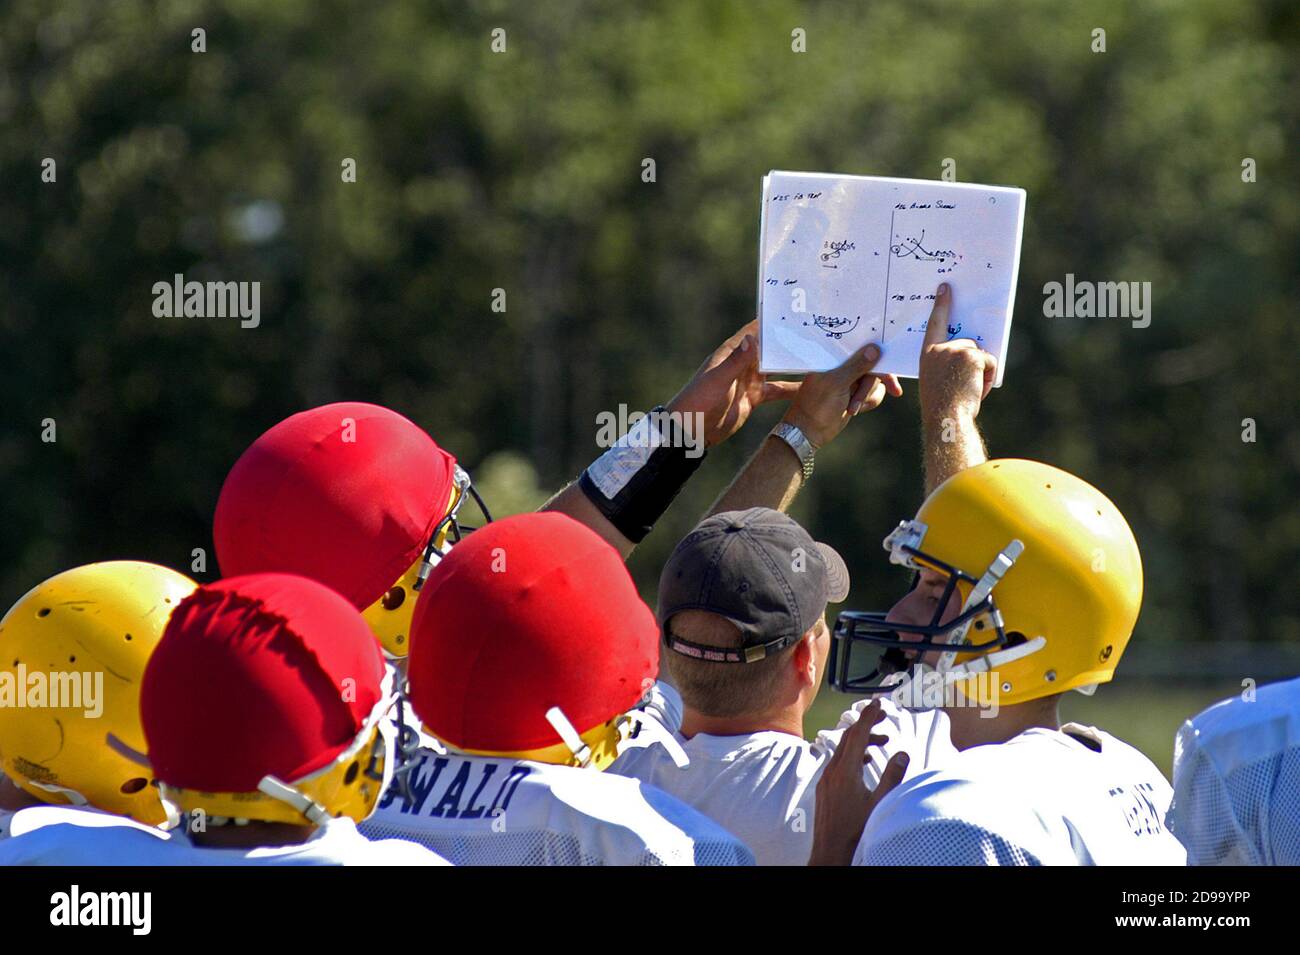 High School Football has coash pointing to play book during a practice session Stock Photo